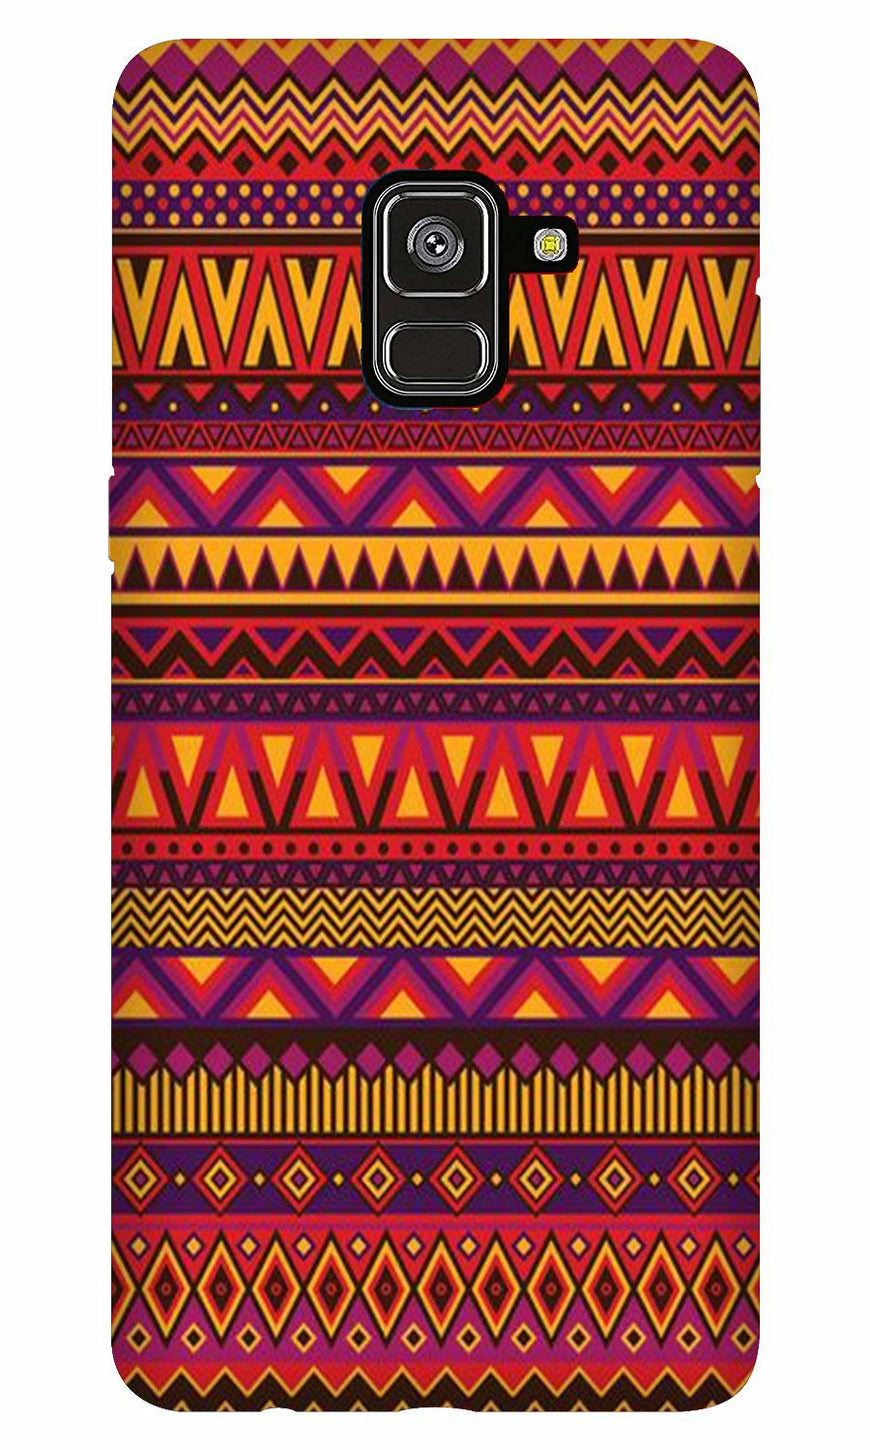 Zigzag line pattern2 Case for Galaxy A8 Plus